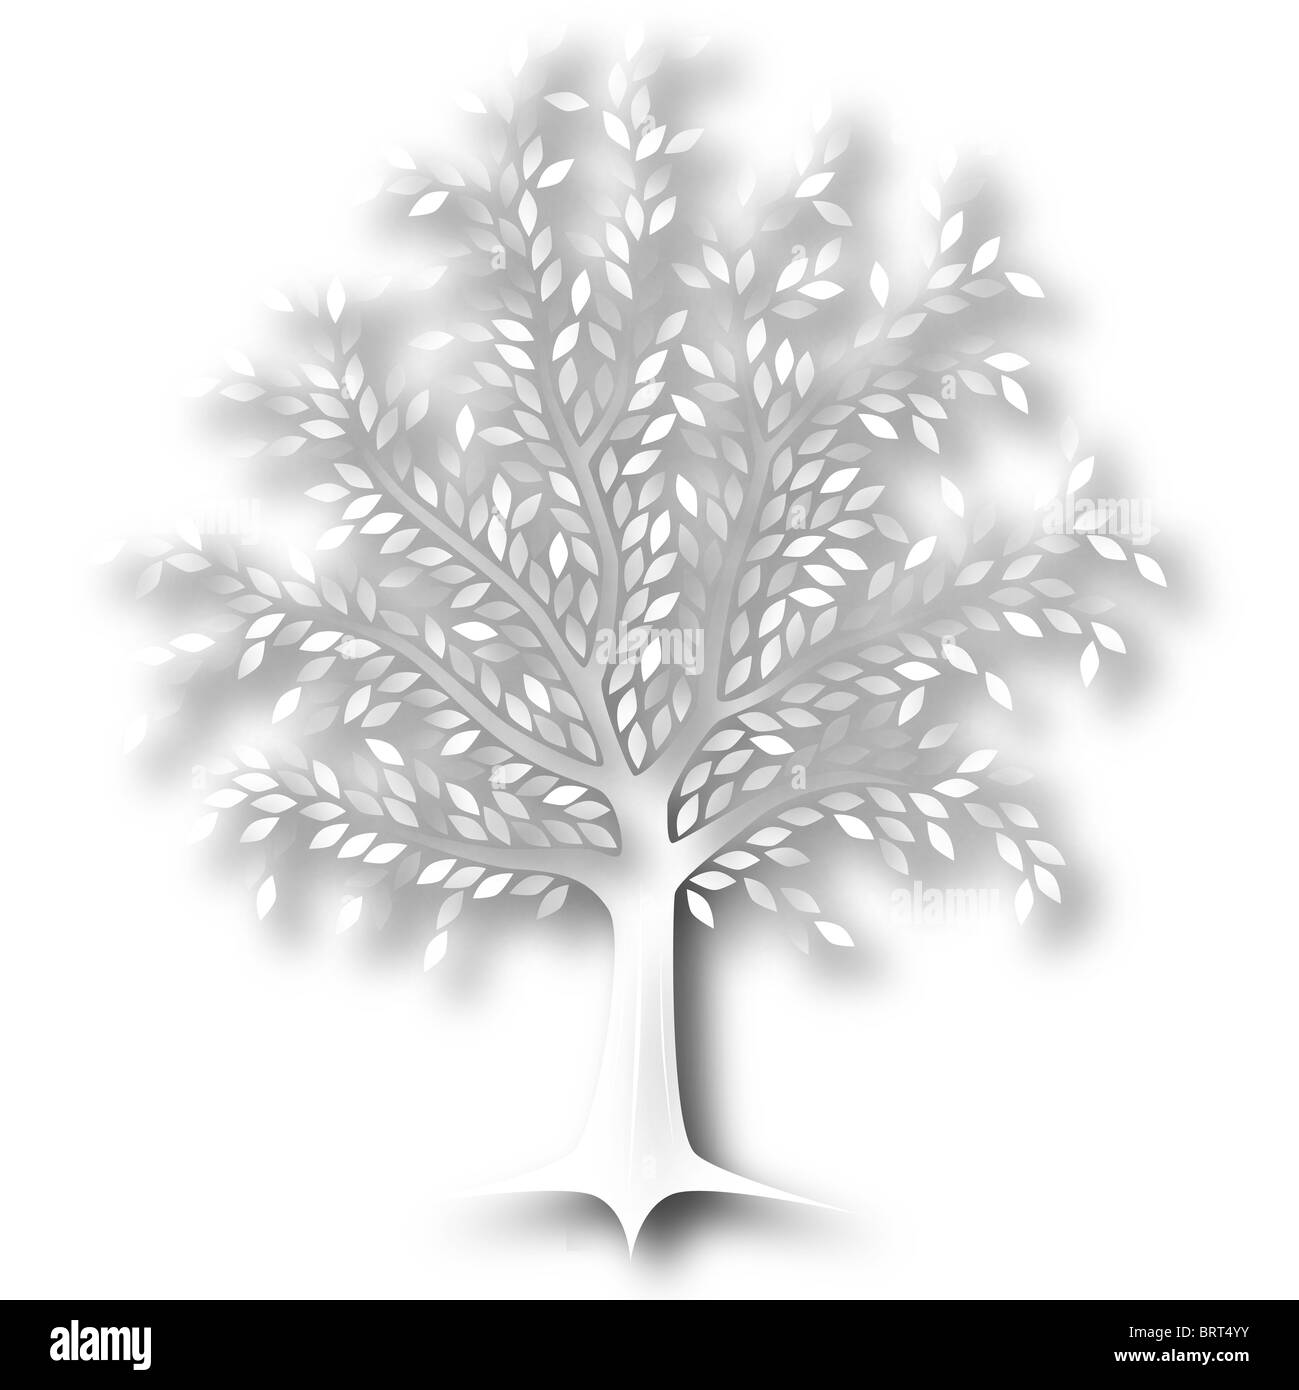 Illustration of a white cutout tree with shadows Stock Photo